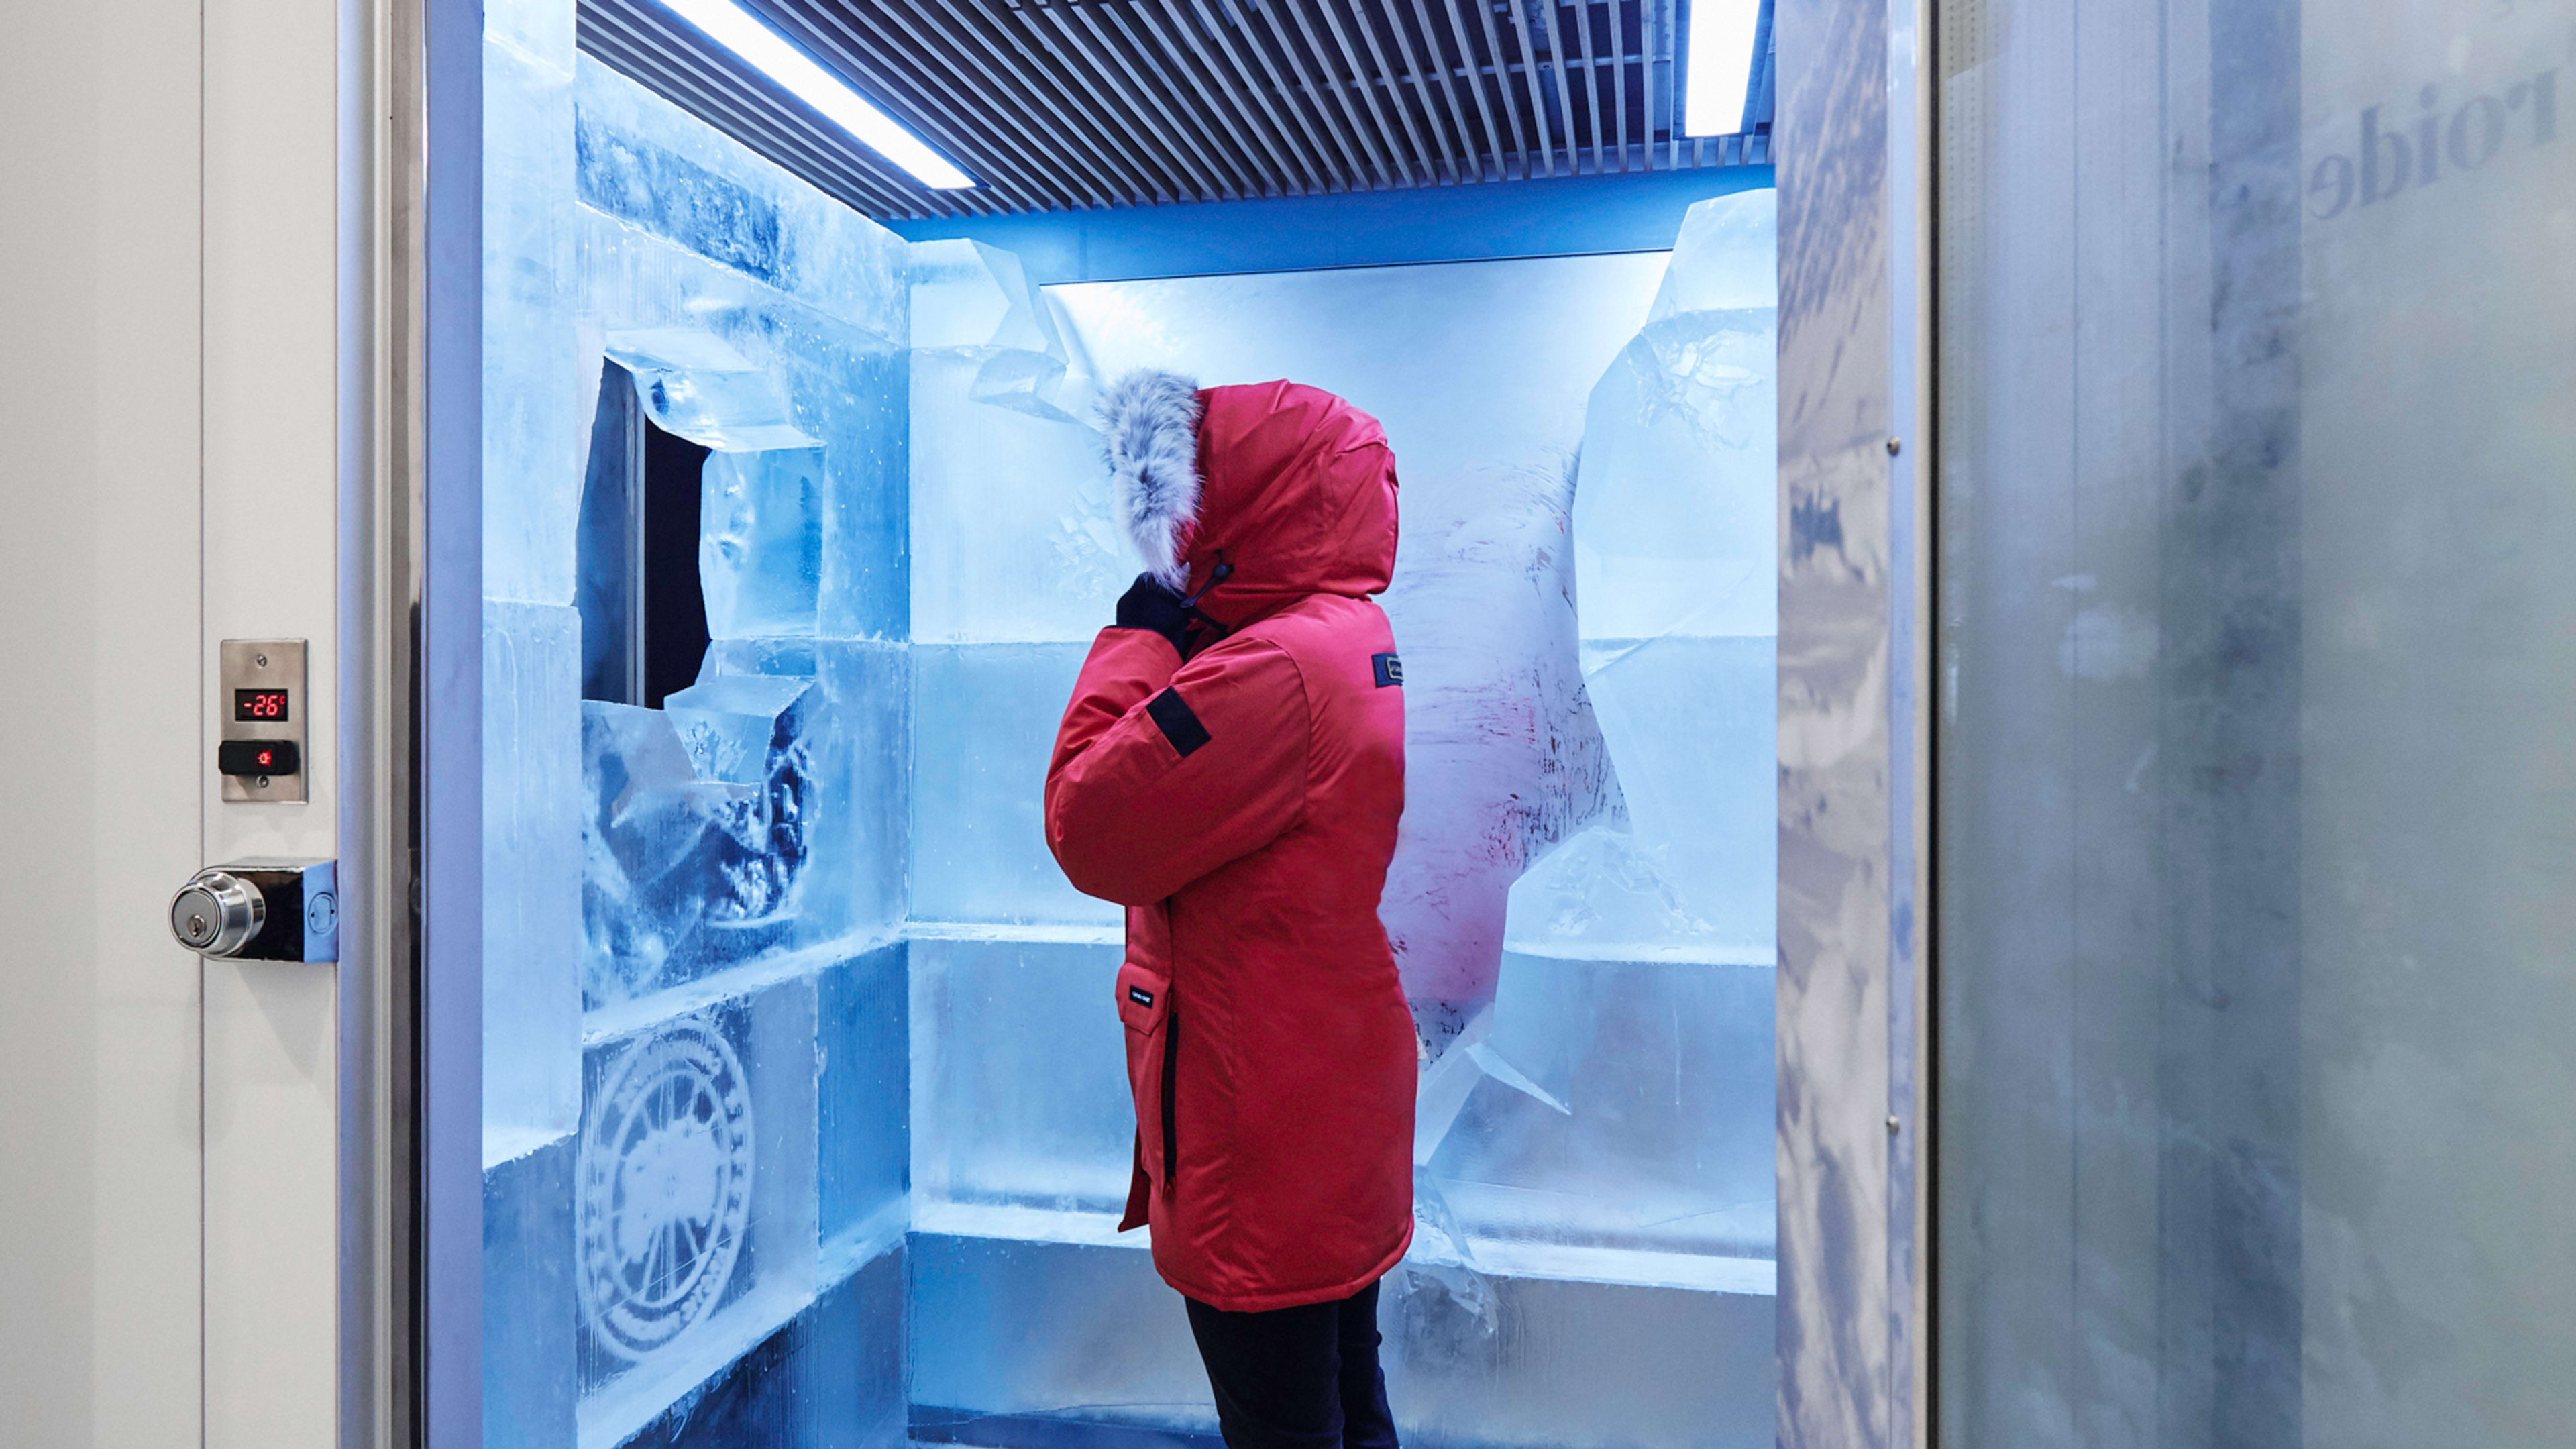 Canada Goose’s Cold Room was the best retail experience of the year